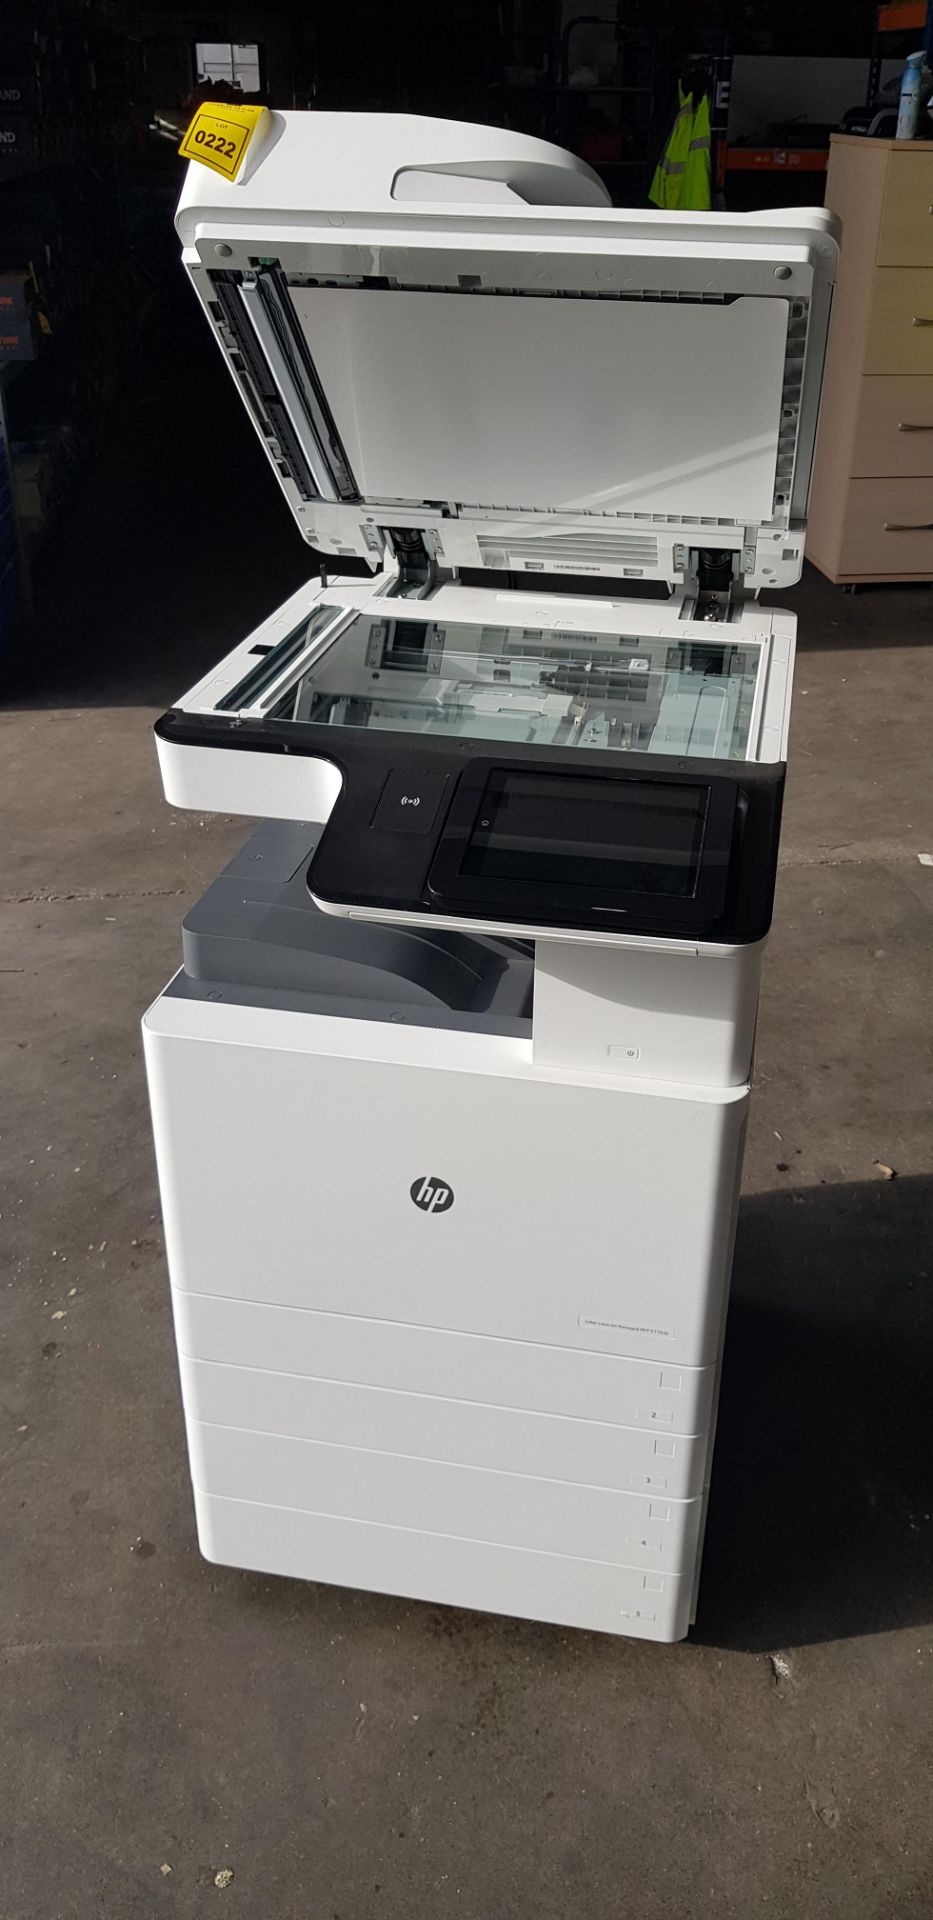 1 X HP COLOR LASER JET MANAGED MFP E77830 - PHOTOCOPIER PRINTER - WITH 4 SECTION BOTTOM PAPER